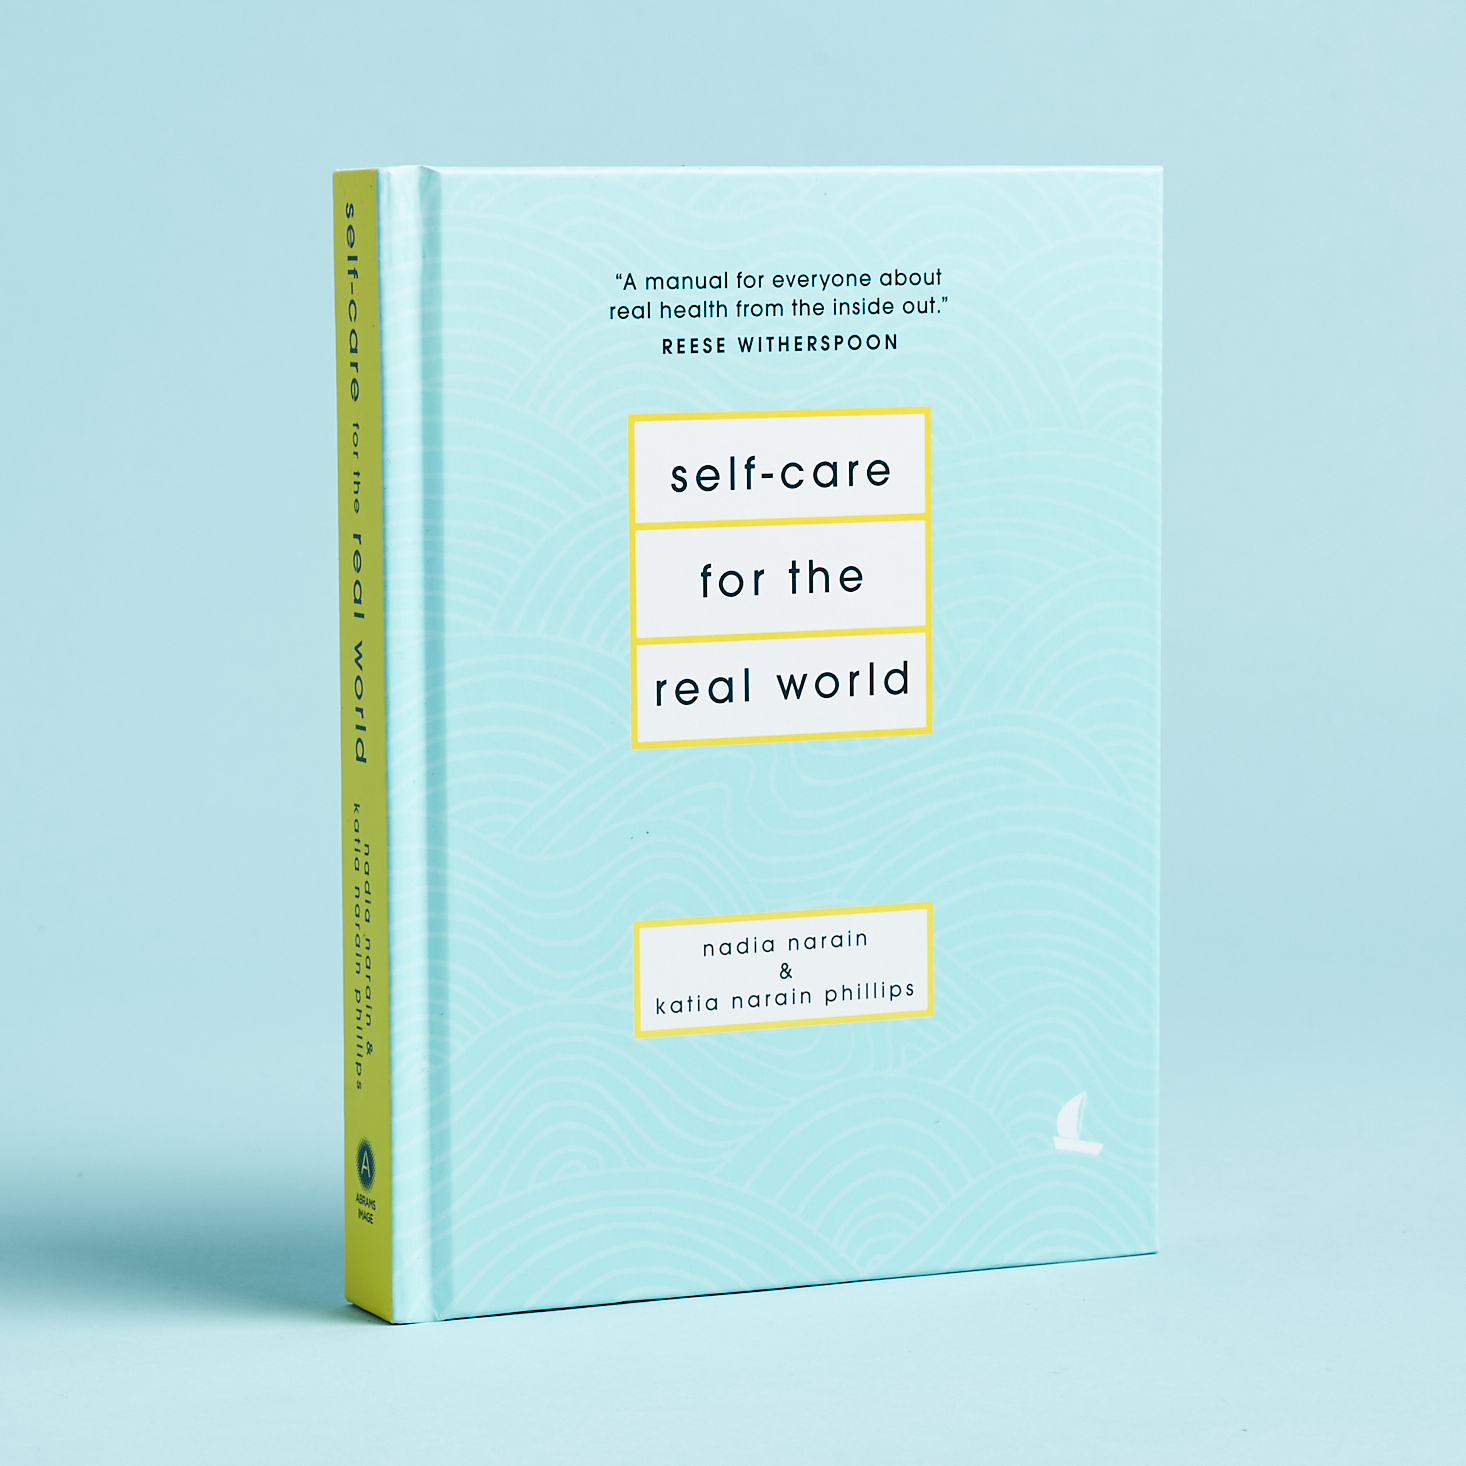 Self-Care for the Real World book.